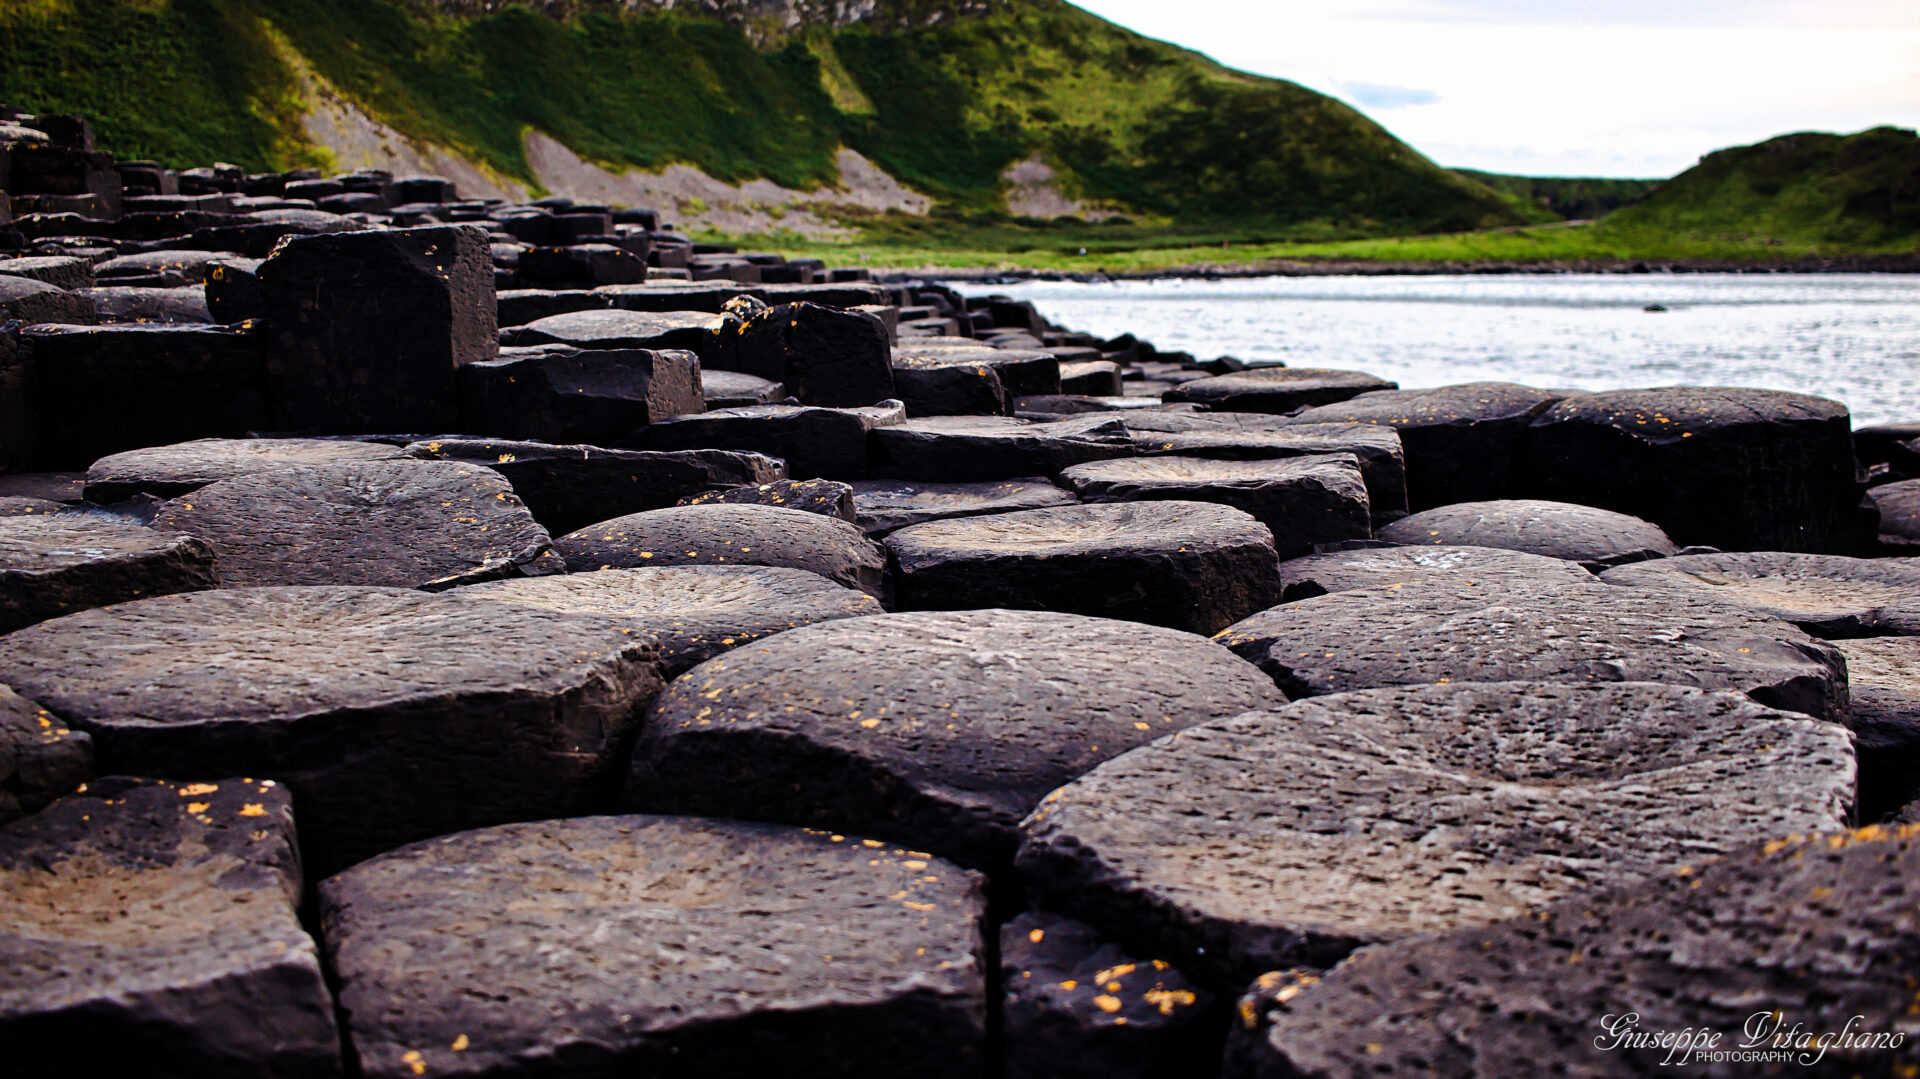 The Giant's Causeway - Northern Ireland 2018